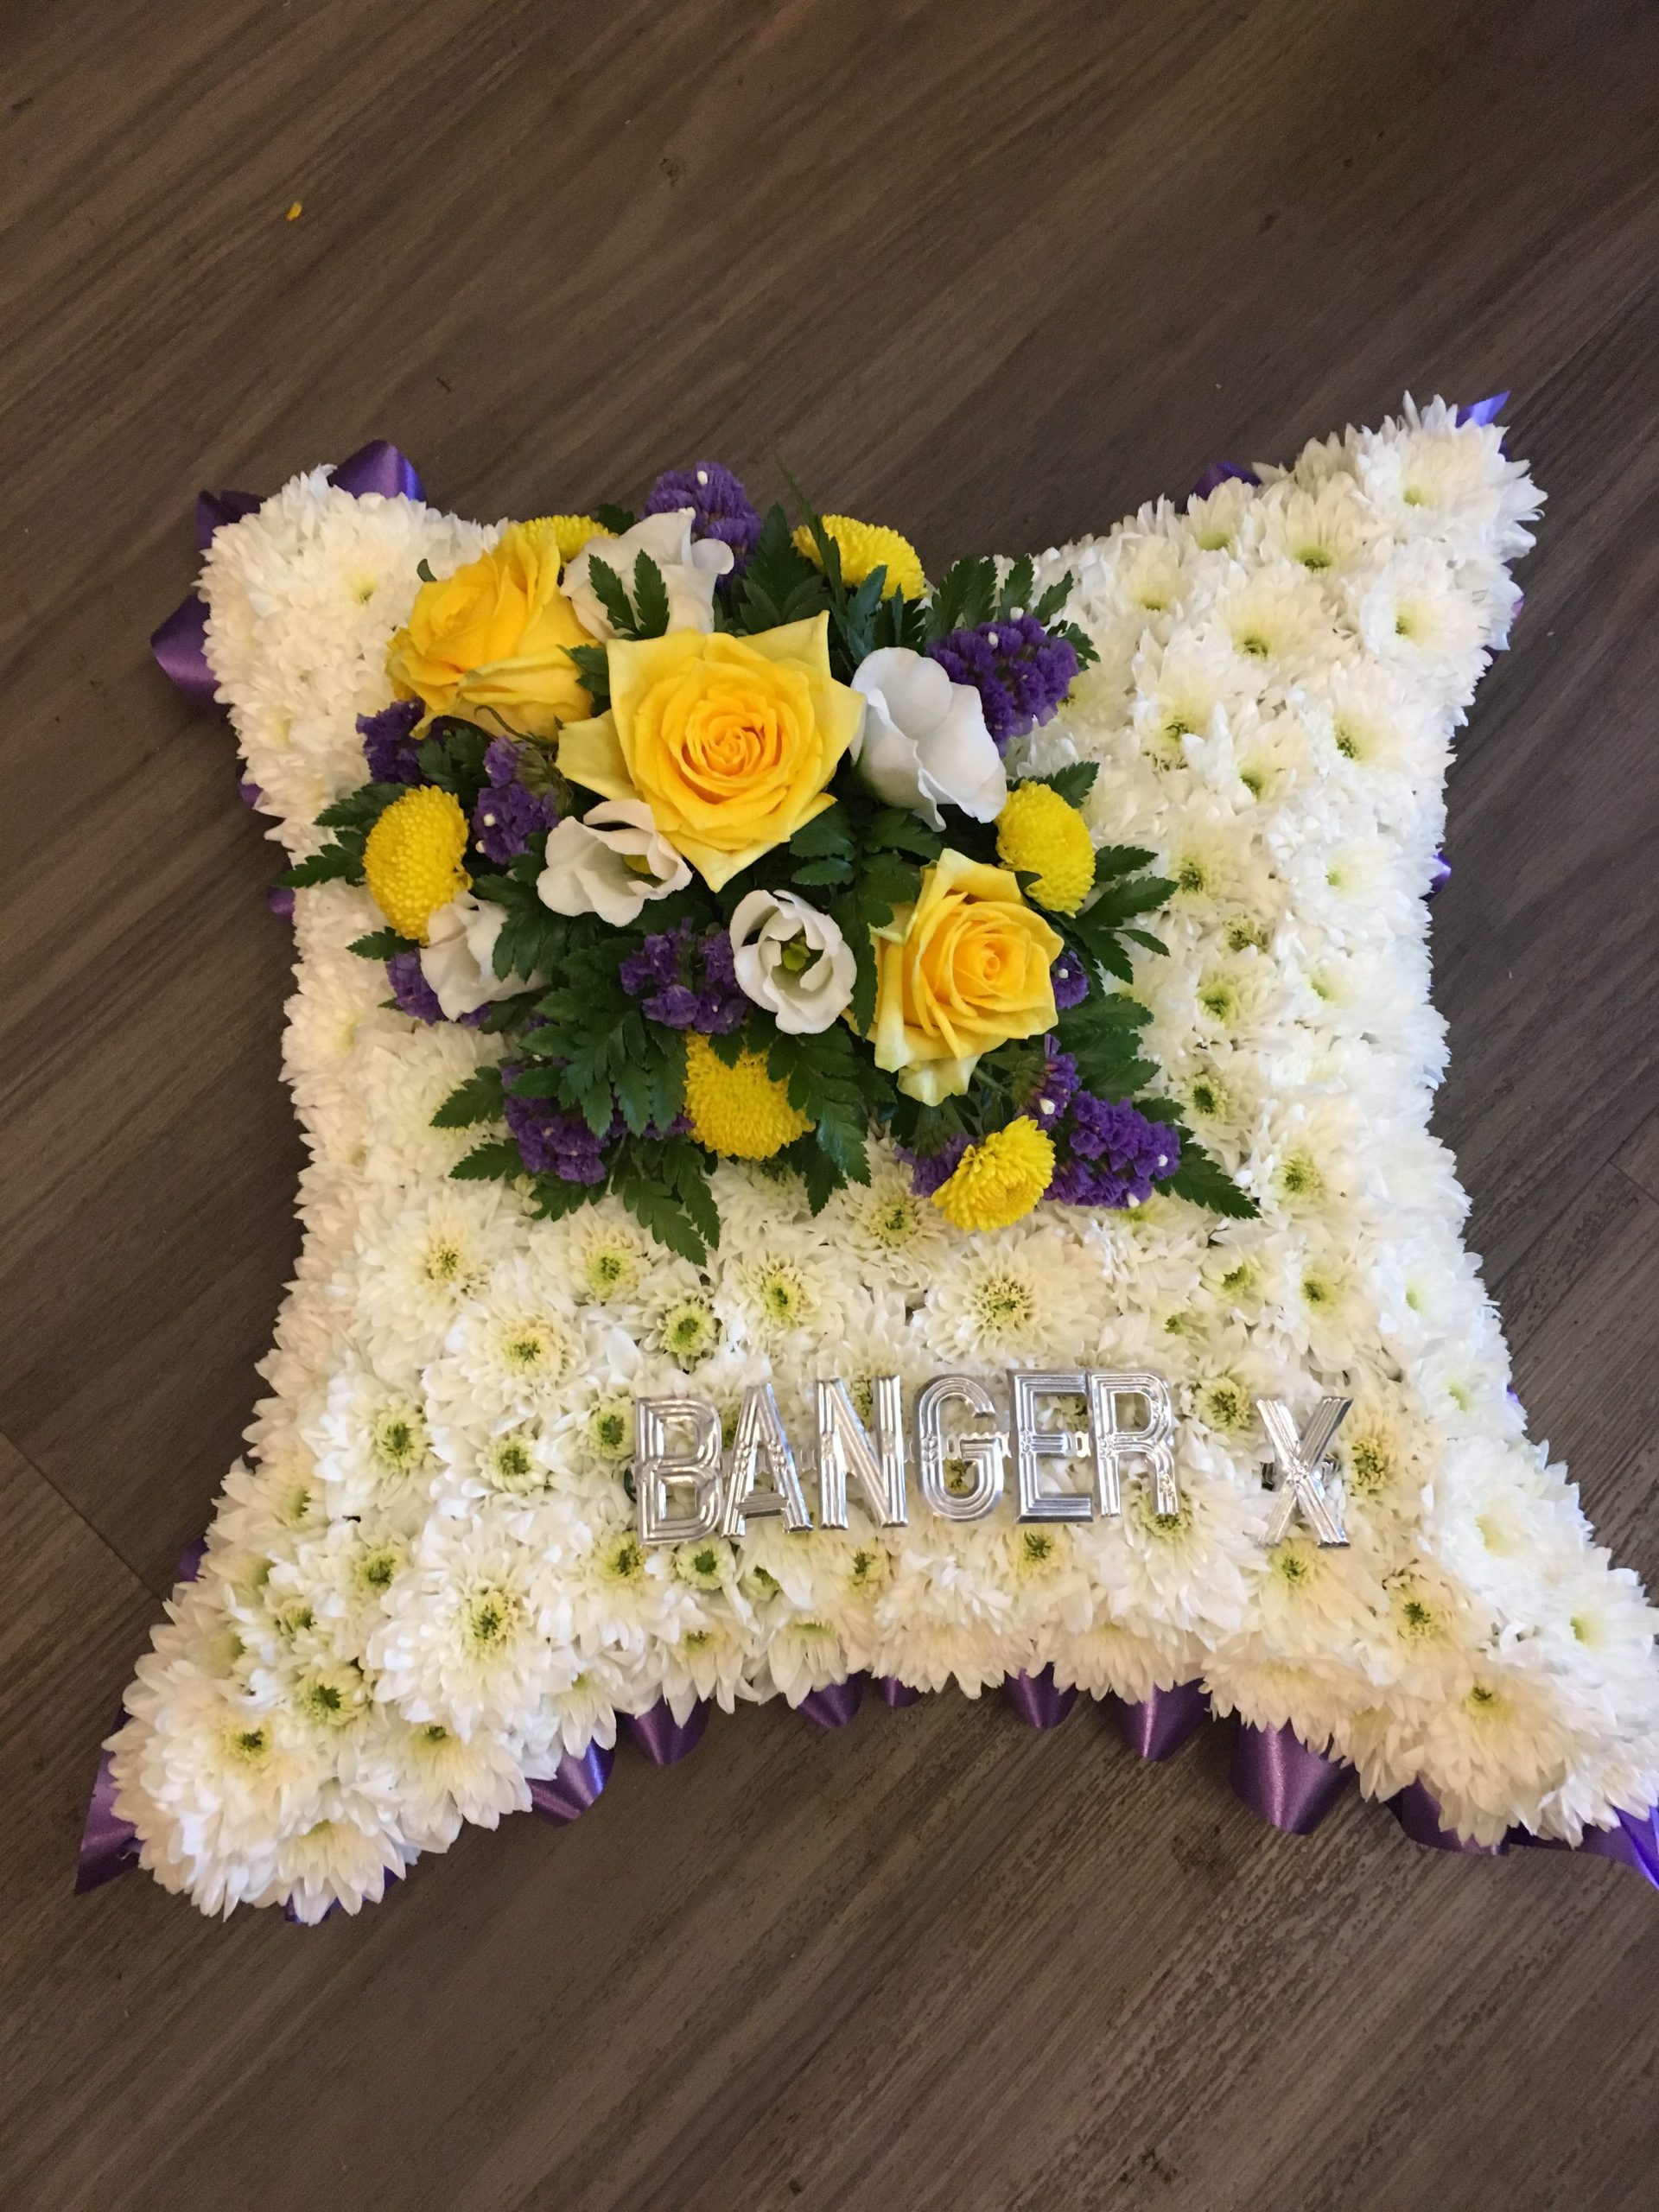 Cushion funeral tribute in yellow & purples